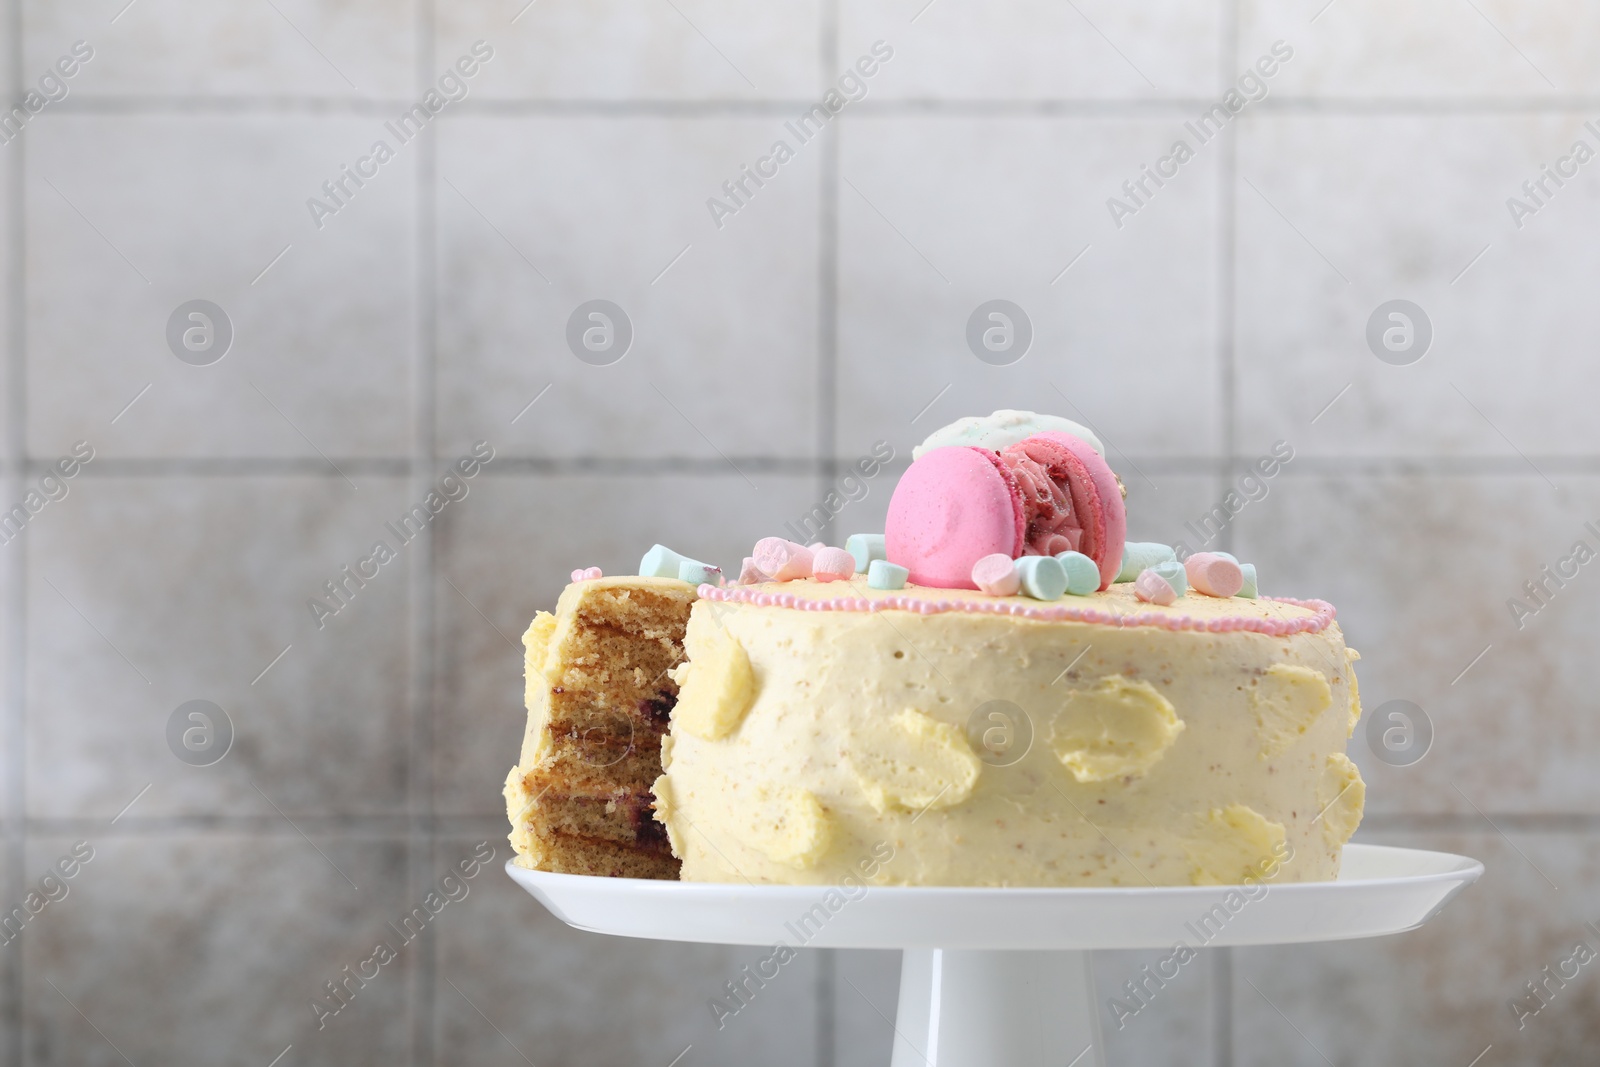 Photo of Delicious cake decorated with macarons and marshmallows against light tiled background